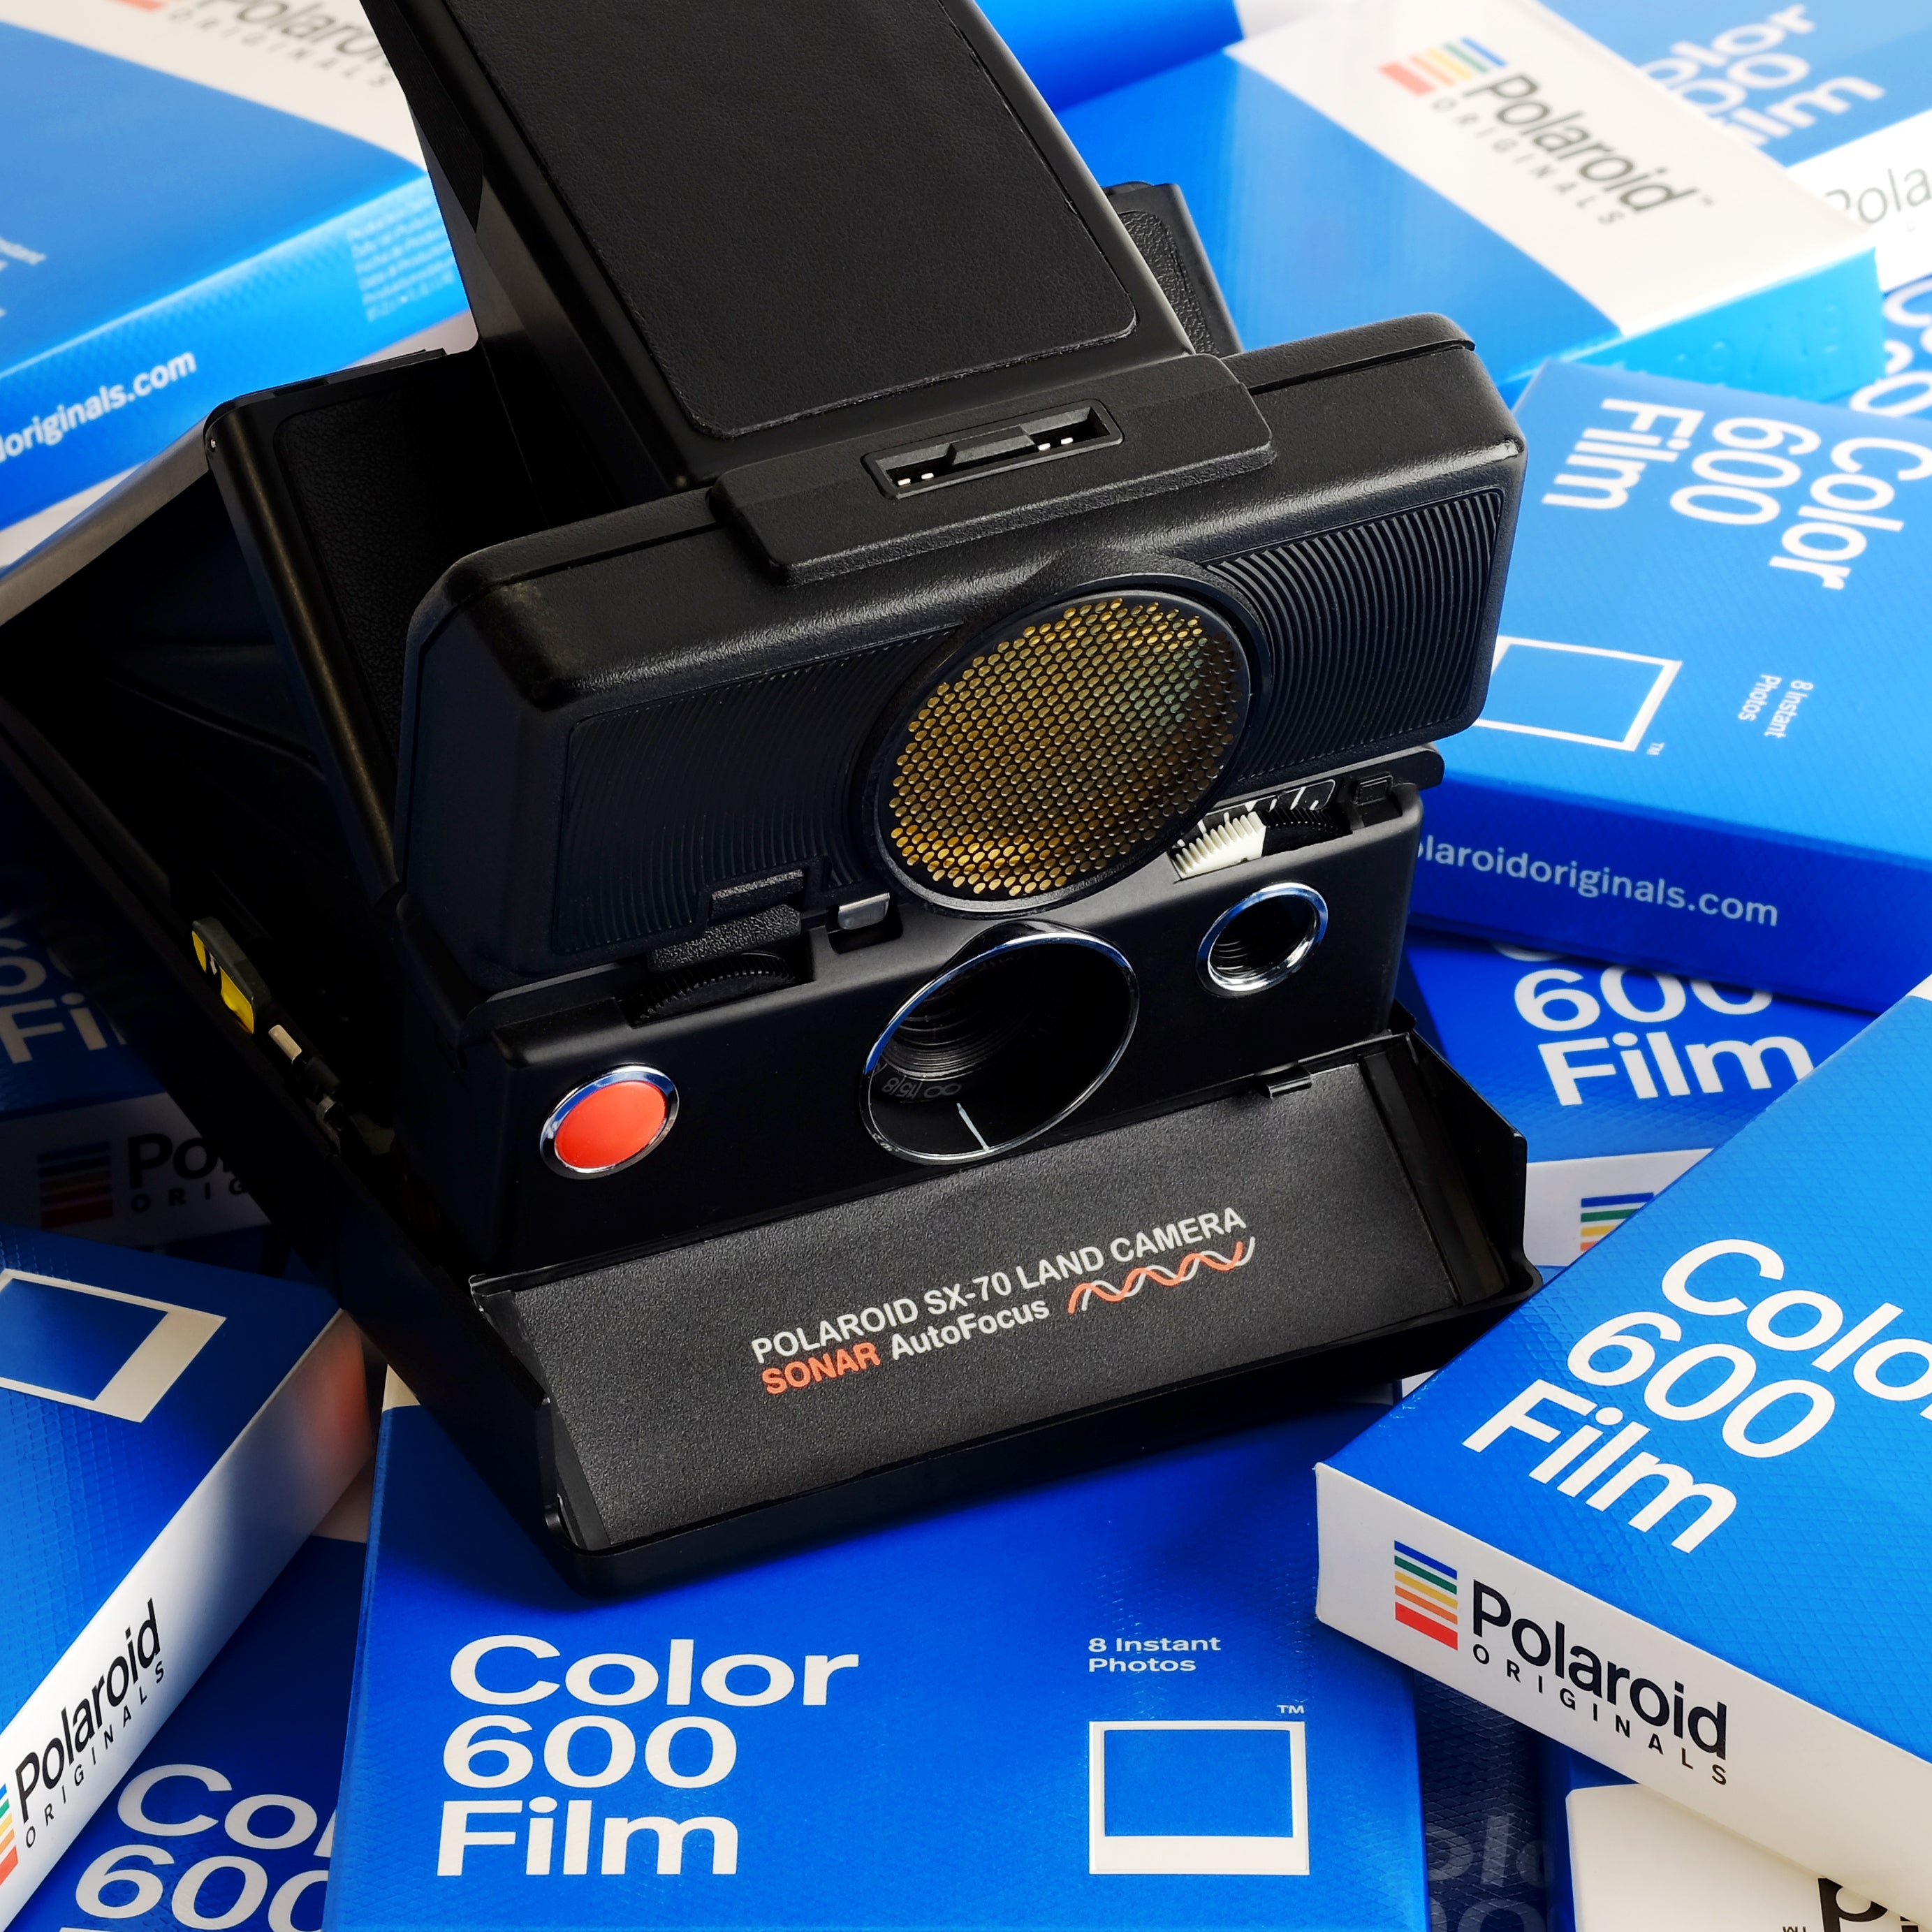 What does it mean to convert my Polaroid SX-70 camera to 600 Film?